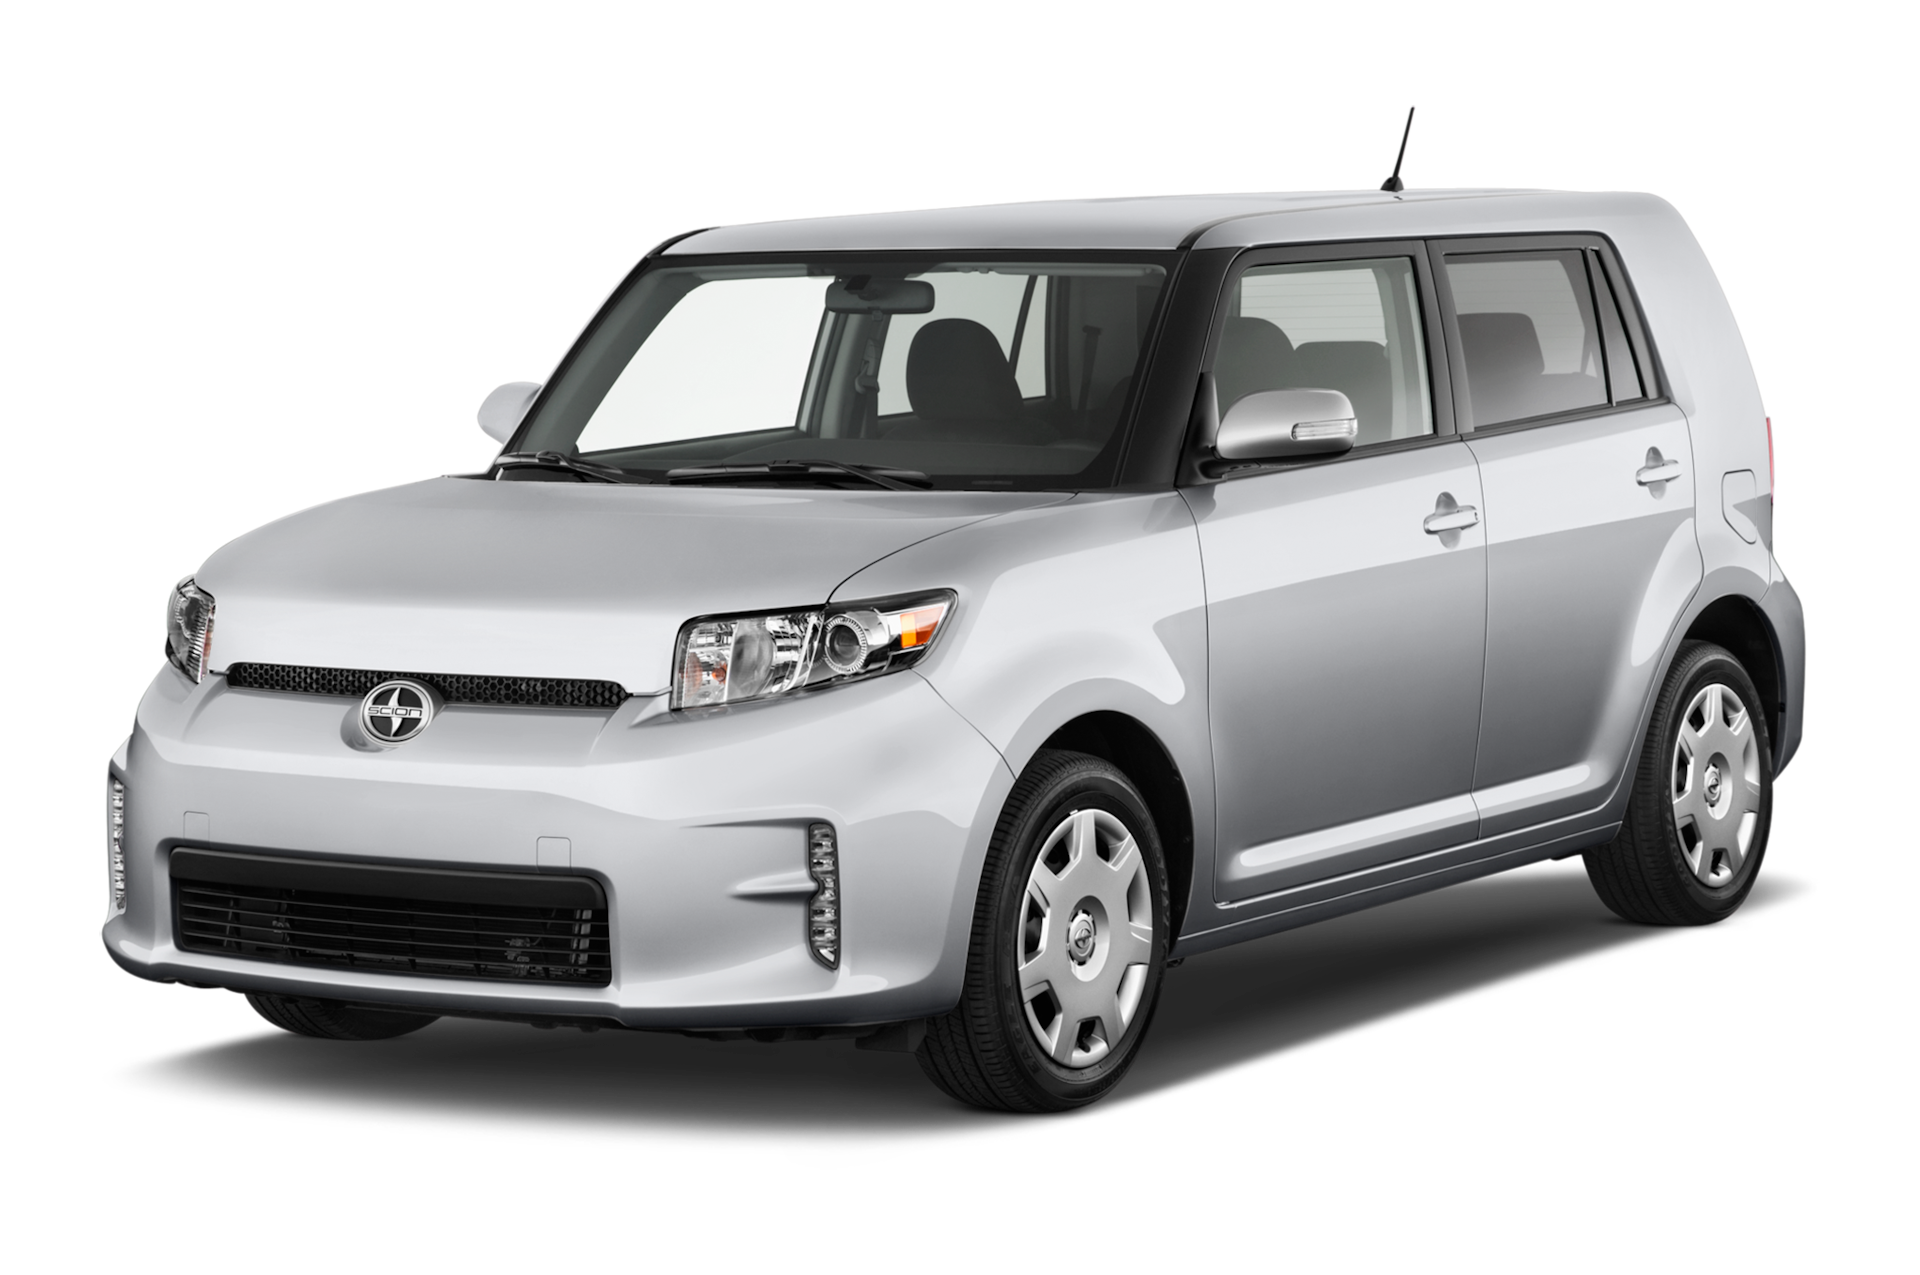 2013 Scion XB Prices, Reviews, and Photos - MotorTrend